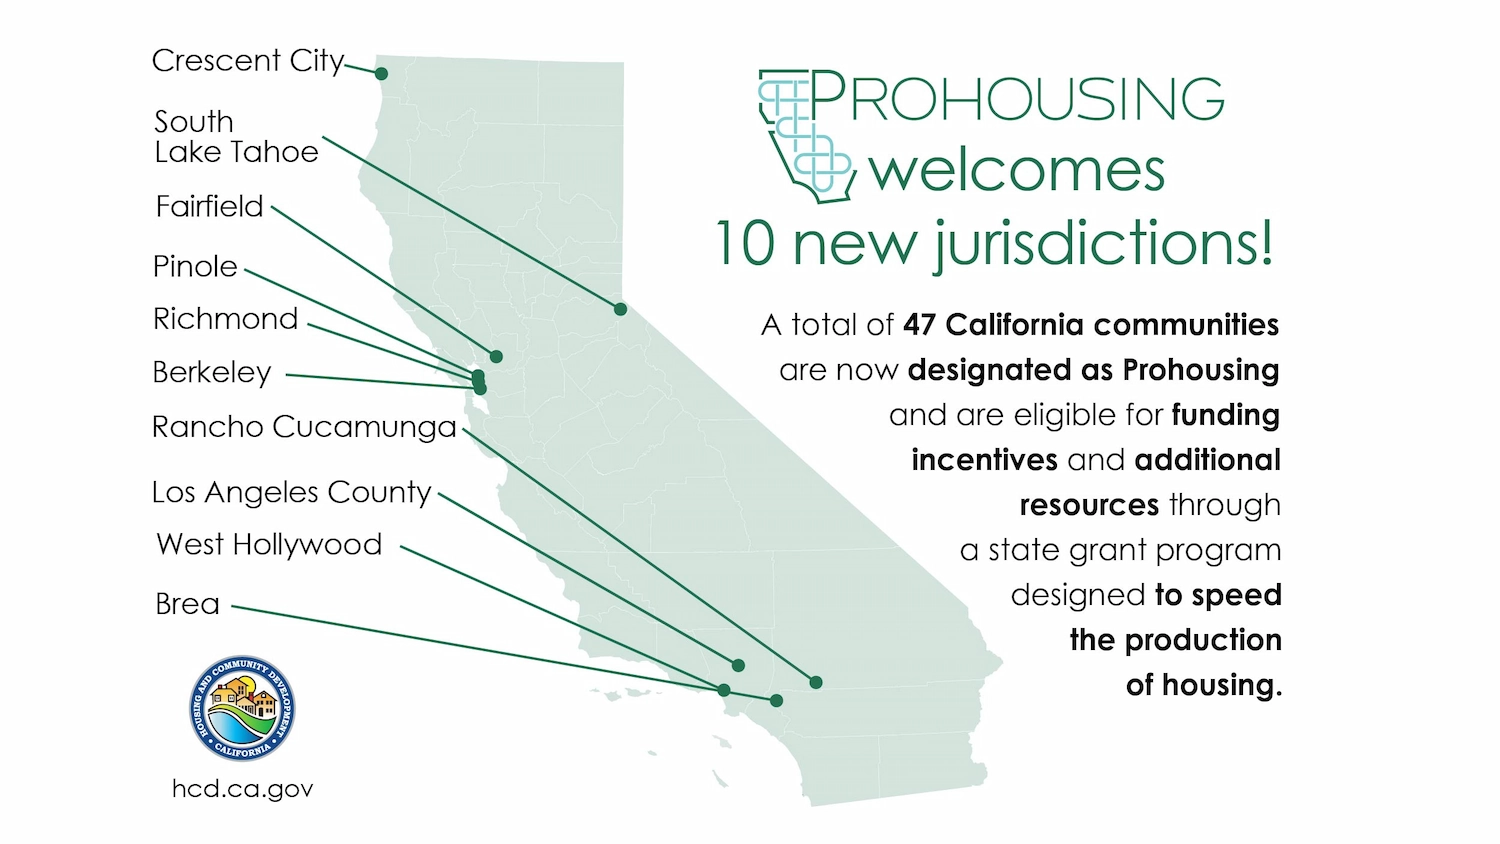 Image of California map with awarded jurisdiction selected. Text reads: Prohousing welcomes 10 new jurisdictions. A total of 47 California communities are now designated as prohousing and are eligible for funding incentives and additional resources through a state grant program designed to speed the production of housing.